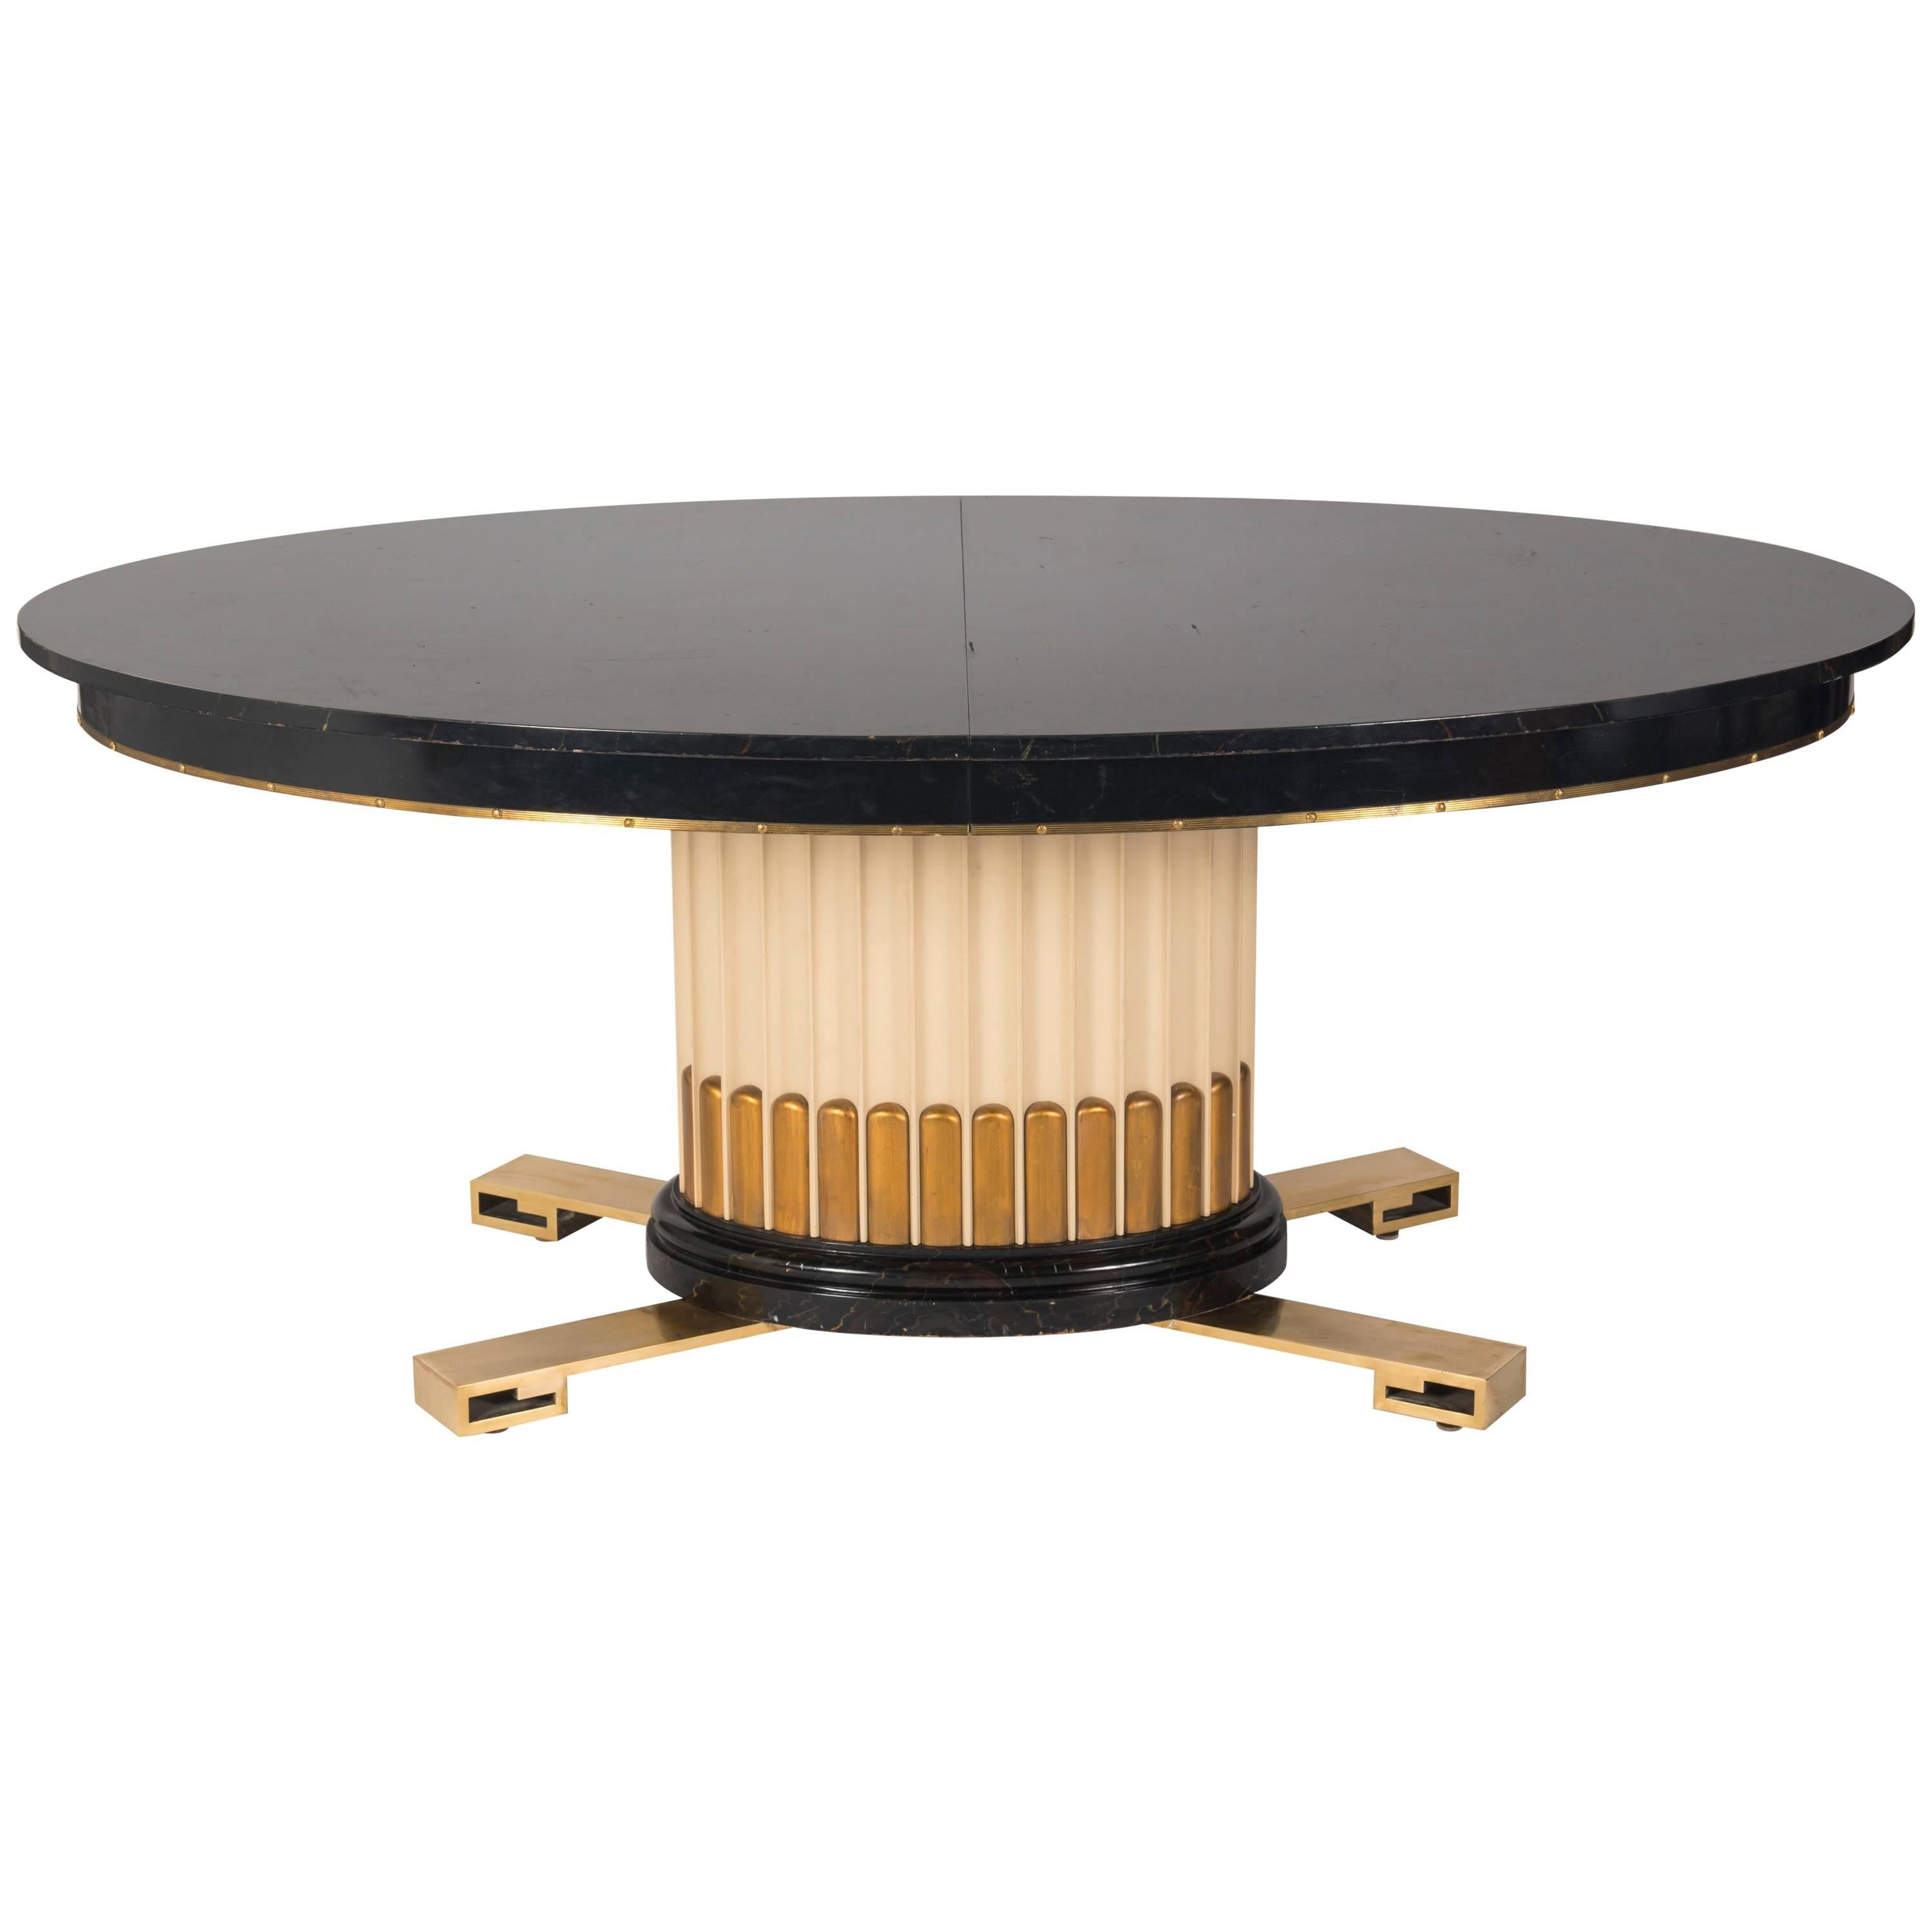 Art Deco Inspired Oval Dining Table by Renzo Rutili